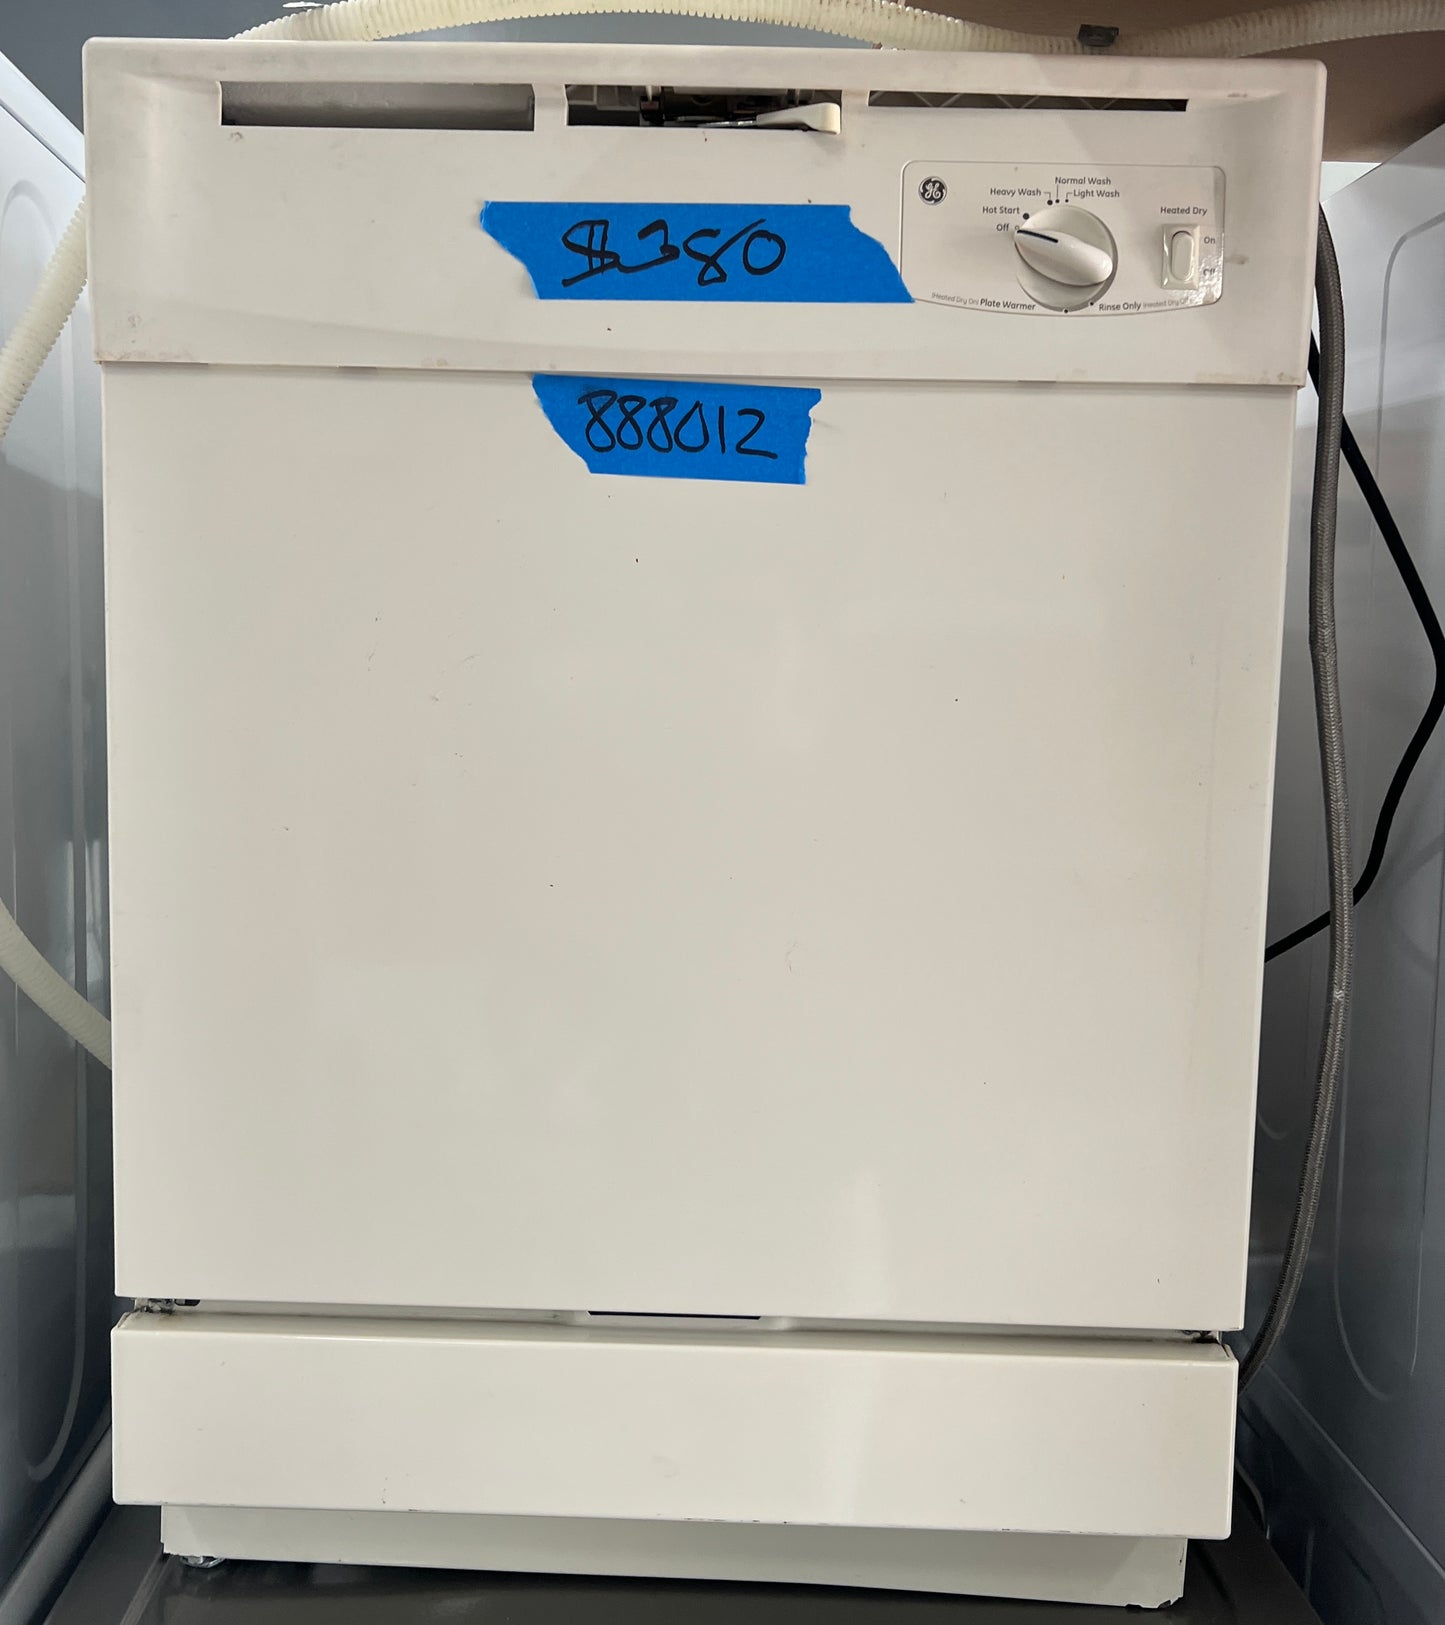 24" GE Dishwasher in Color Off White Used with Warranty 888012